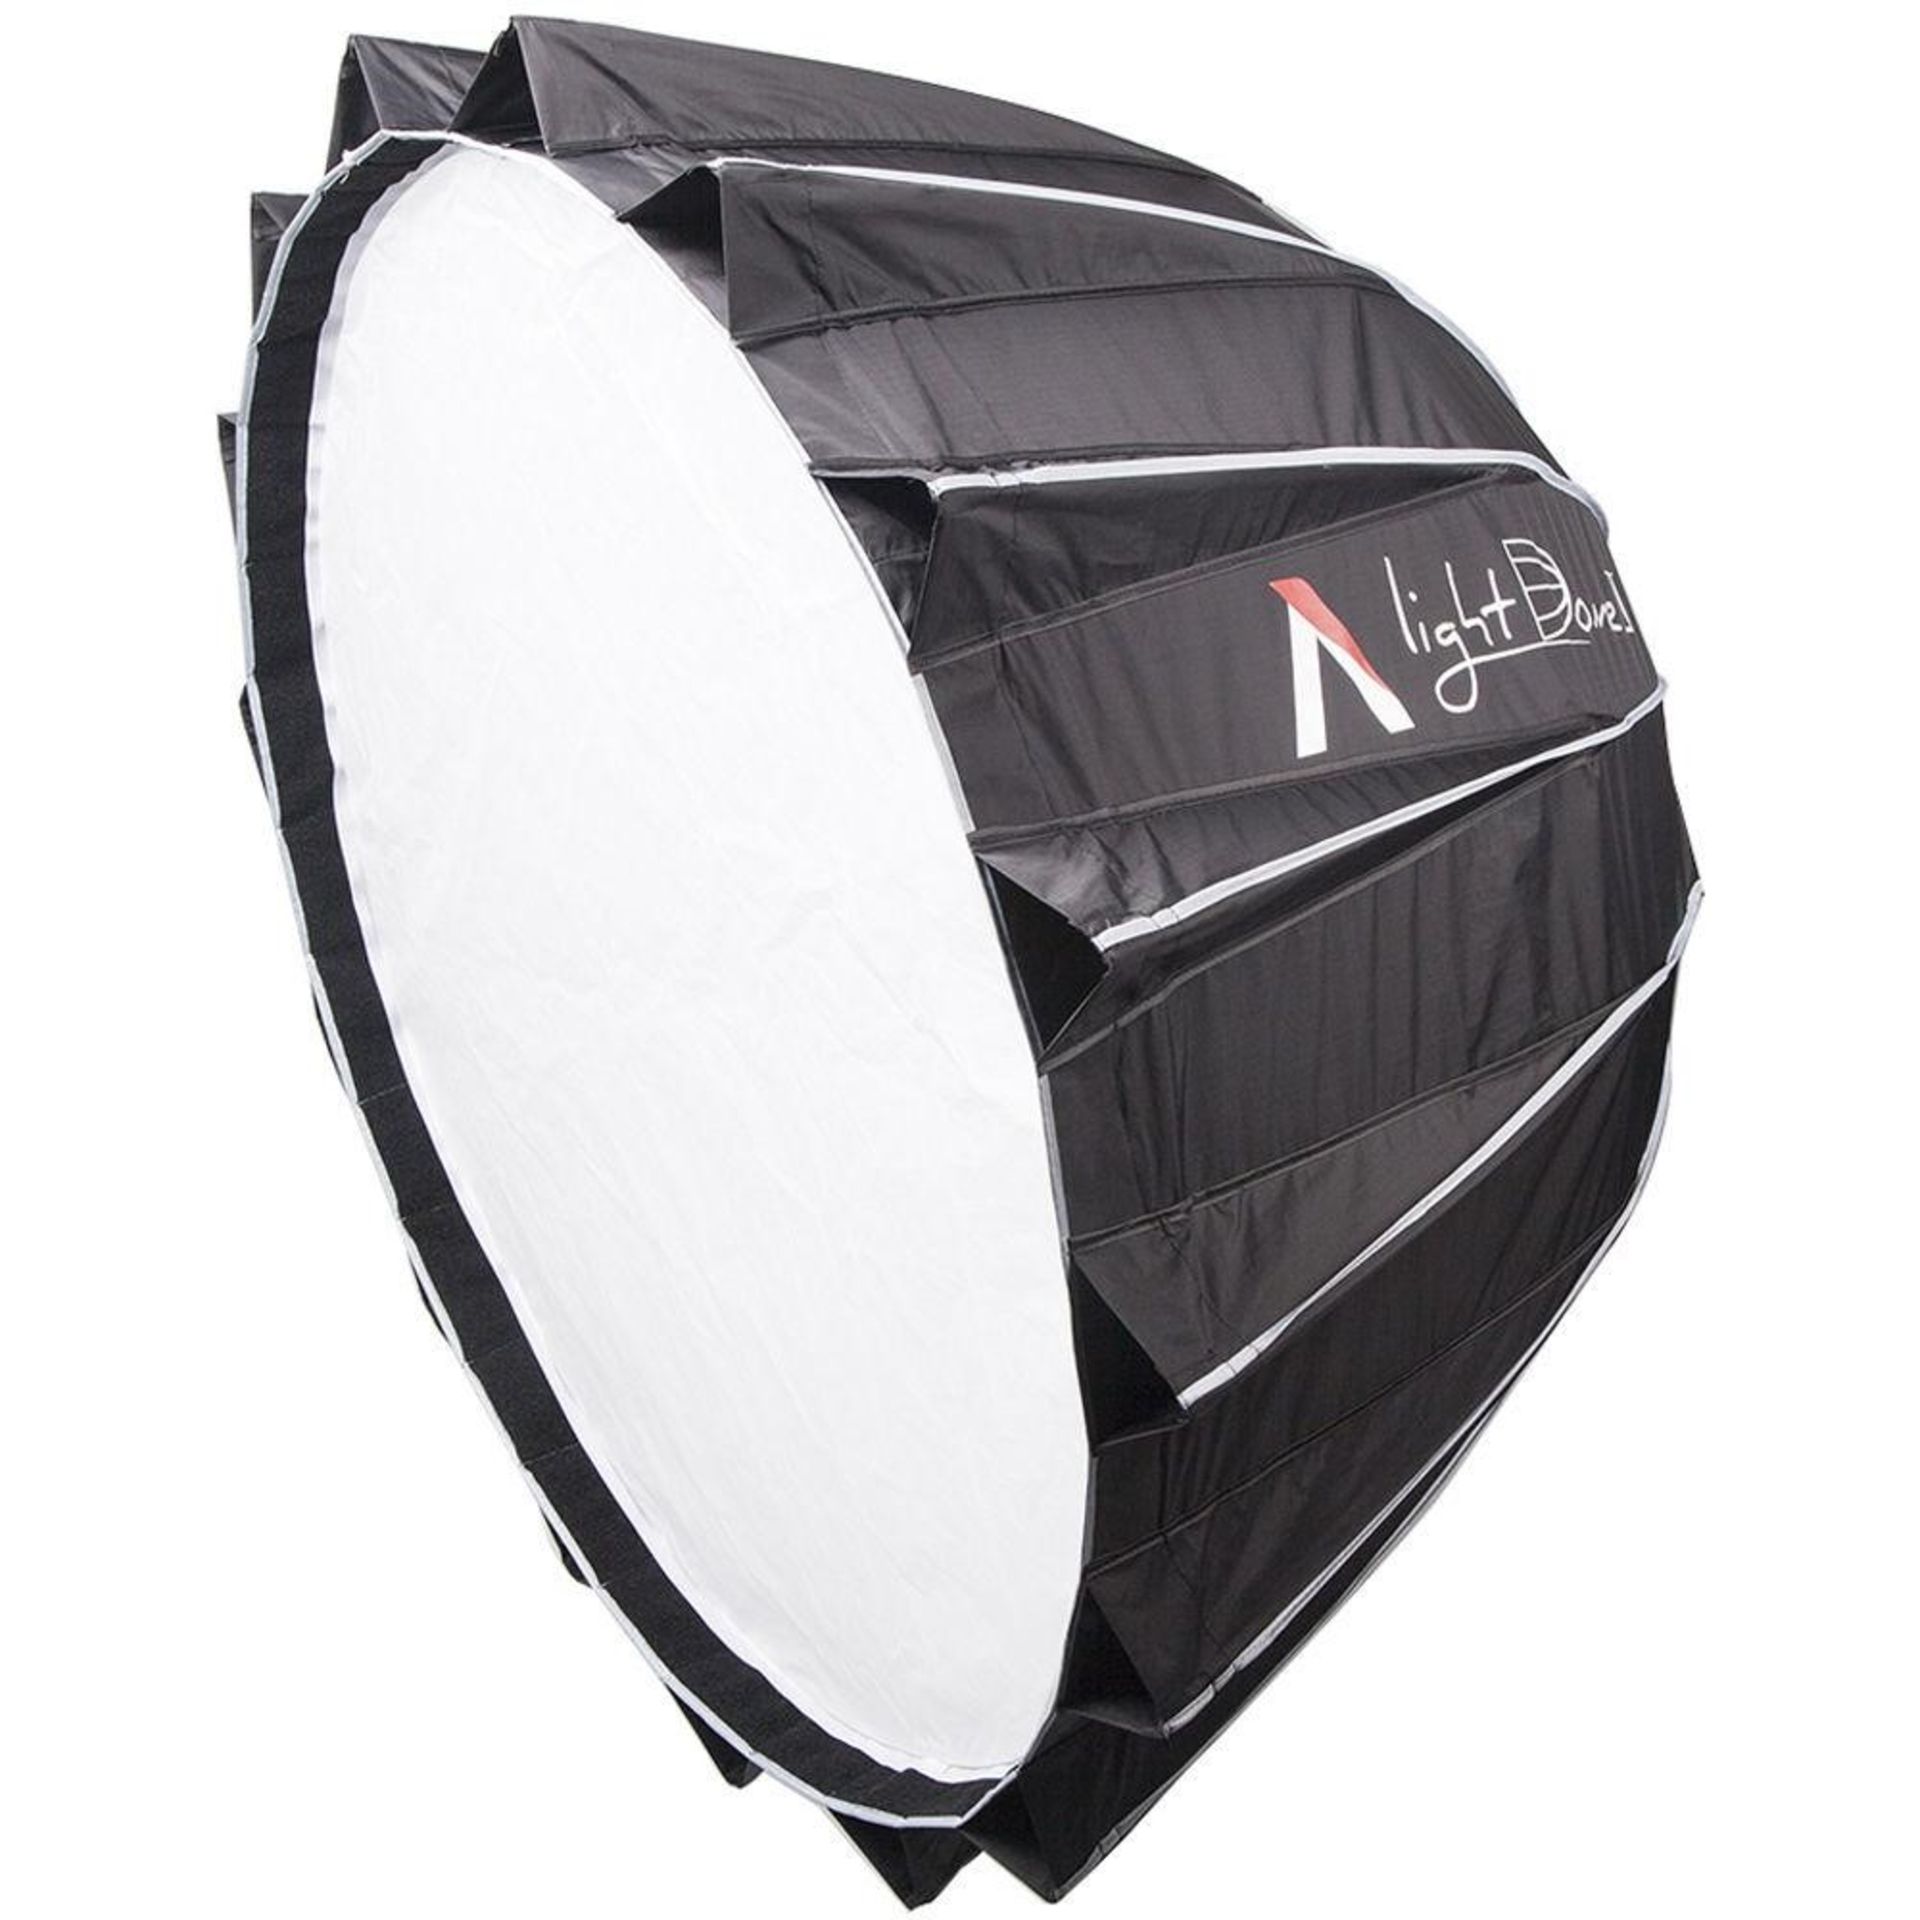 APATURE LIGHT DOME II - IN A CARRY BAG